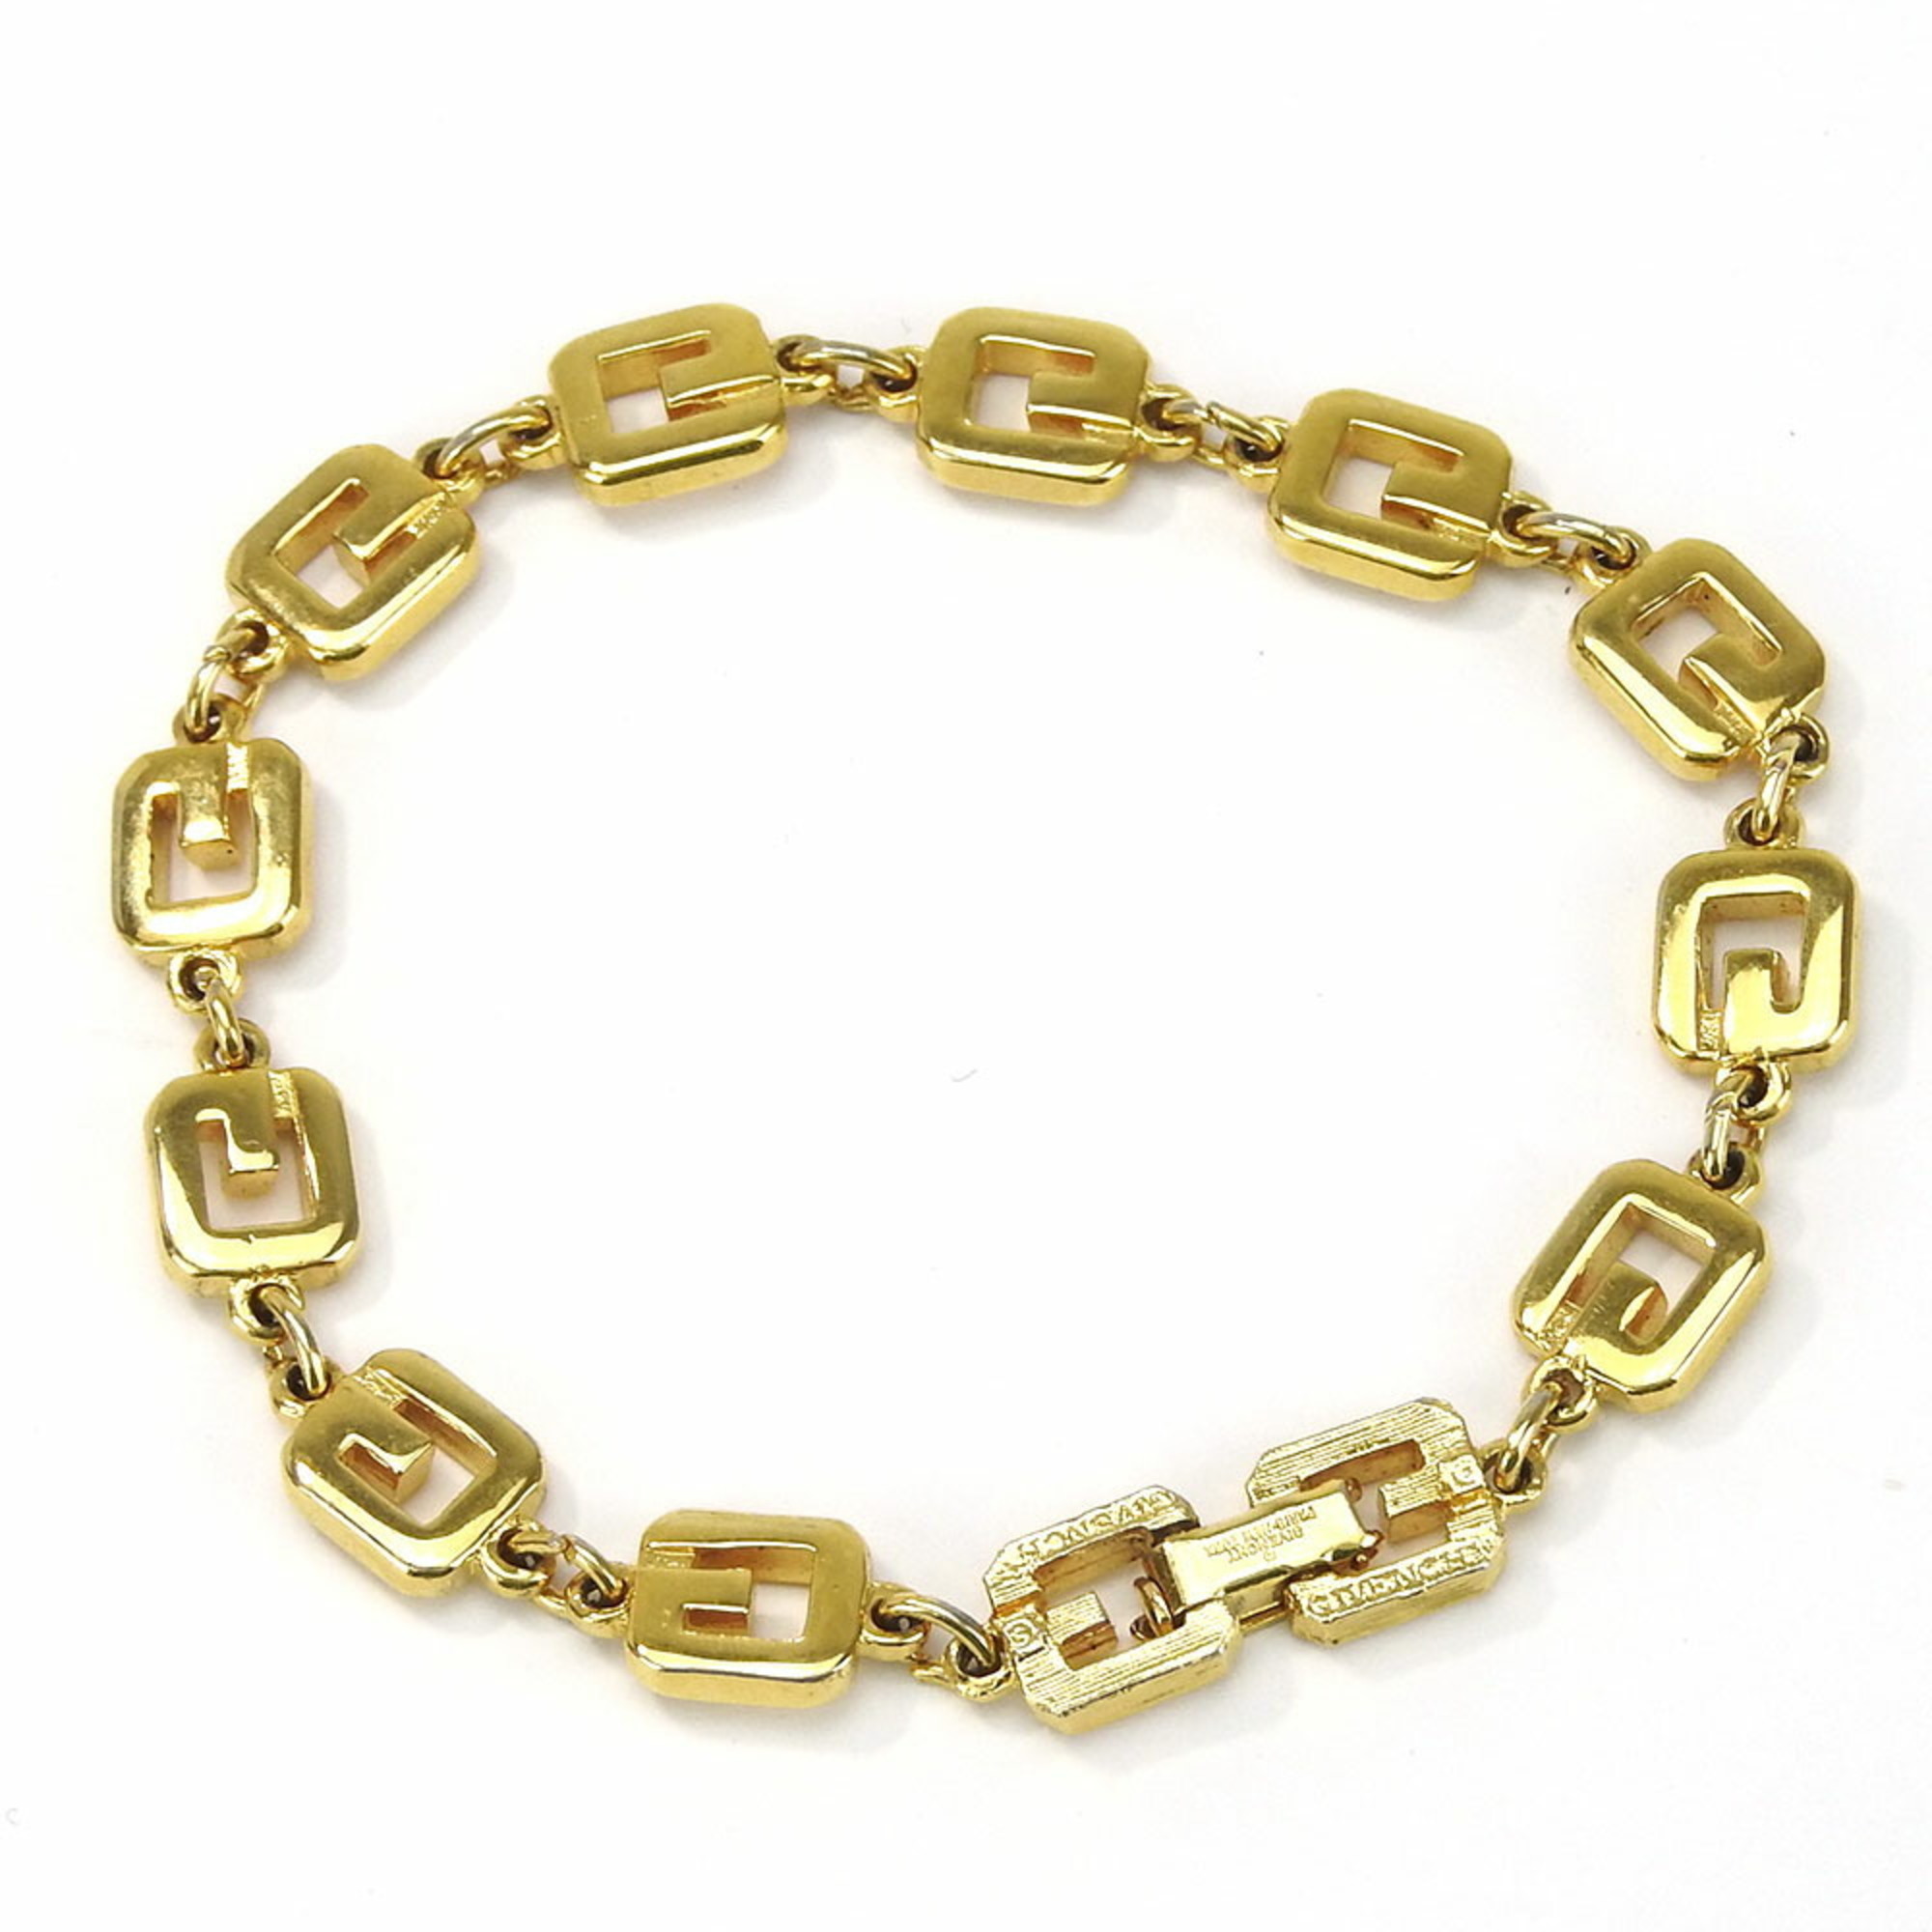 Givenchy bracelet metal gold plated women's